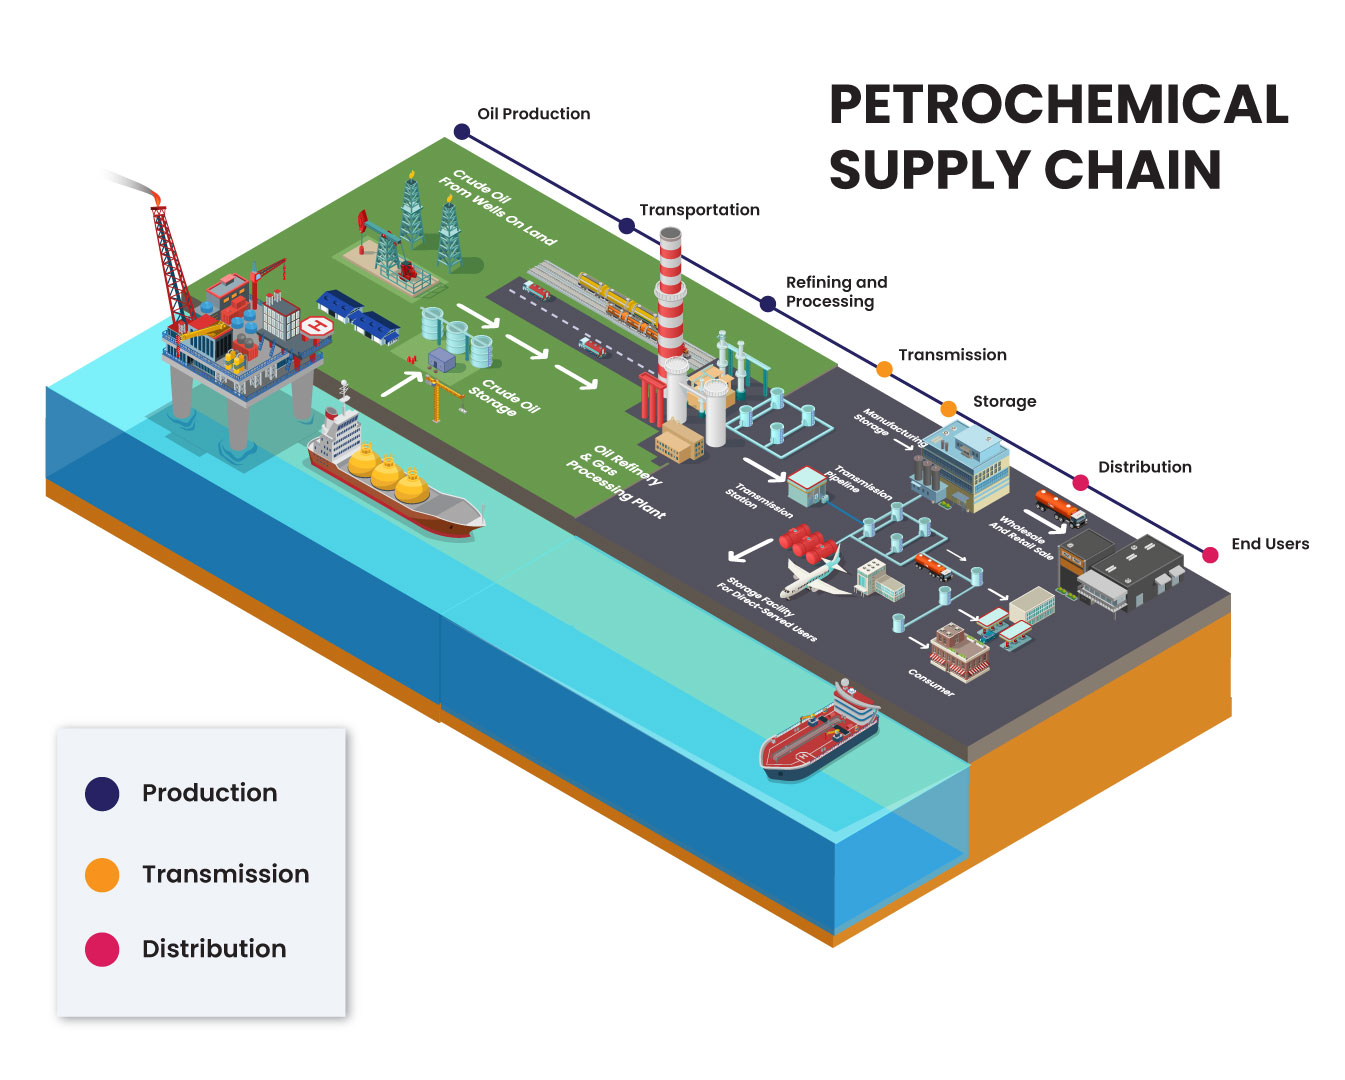 Petrochemical Supply Chain Ilustration